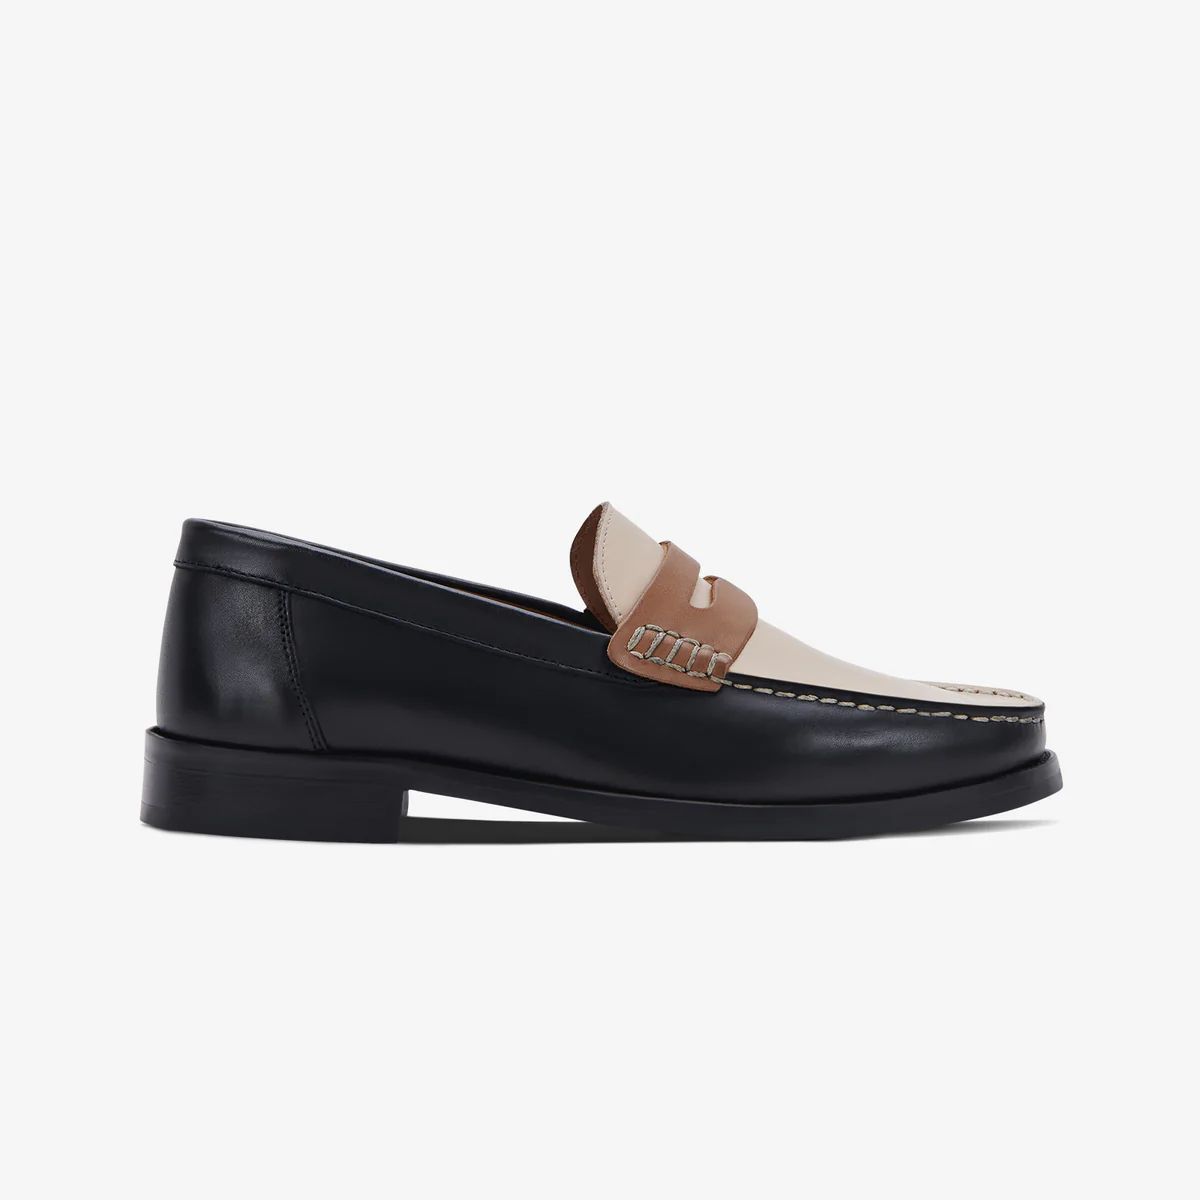 The Essex Penny Loafer - Black Multi | Greats.com